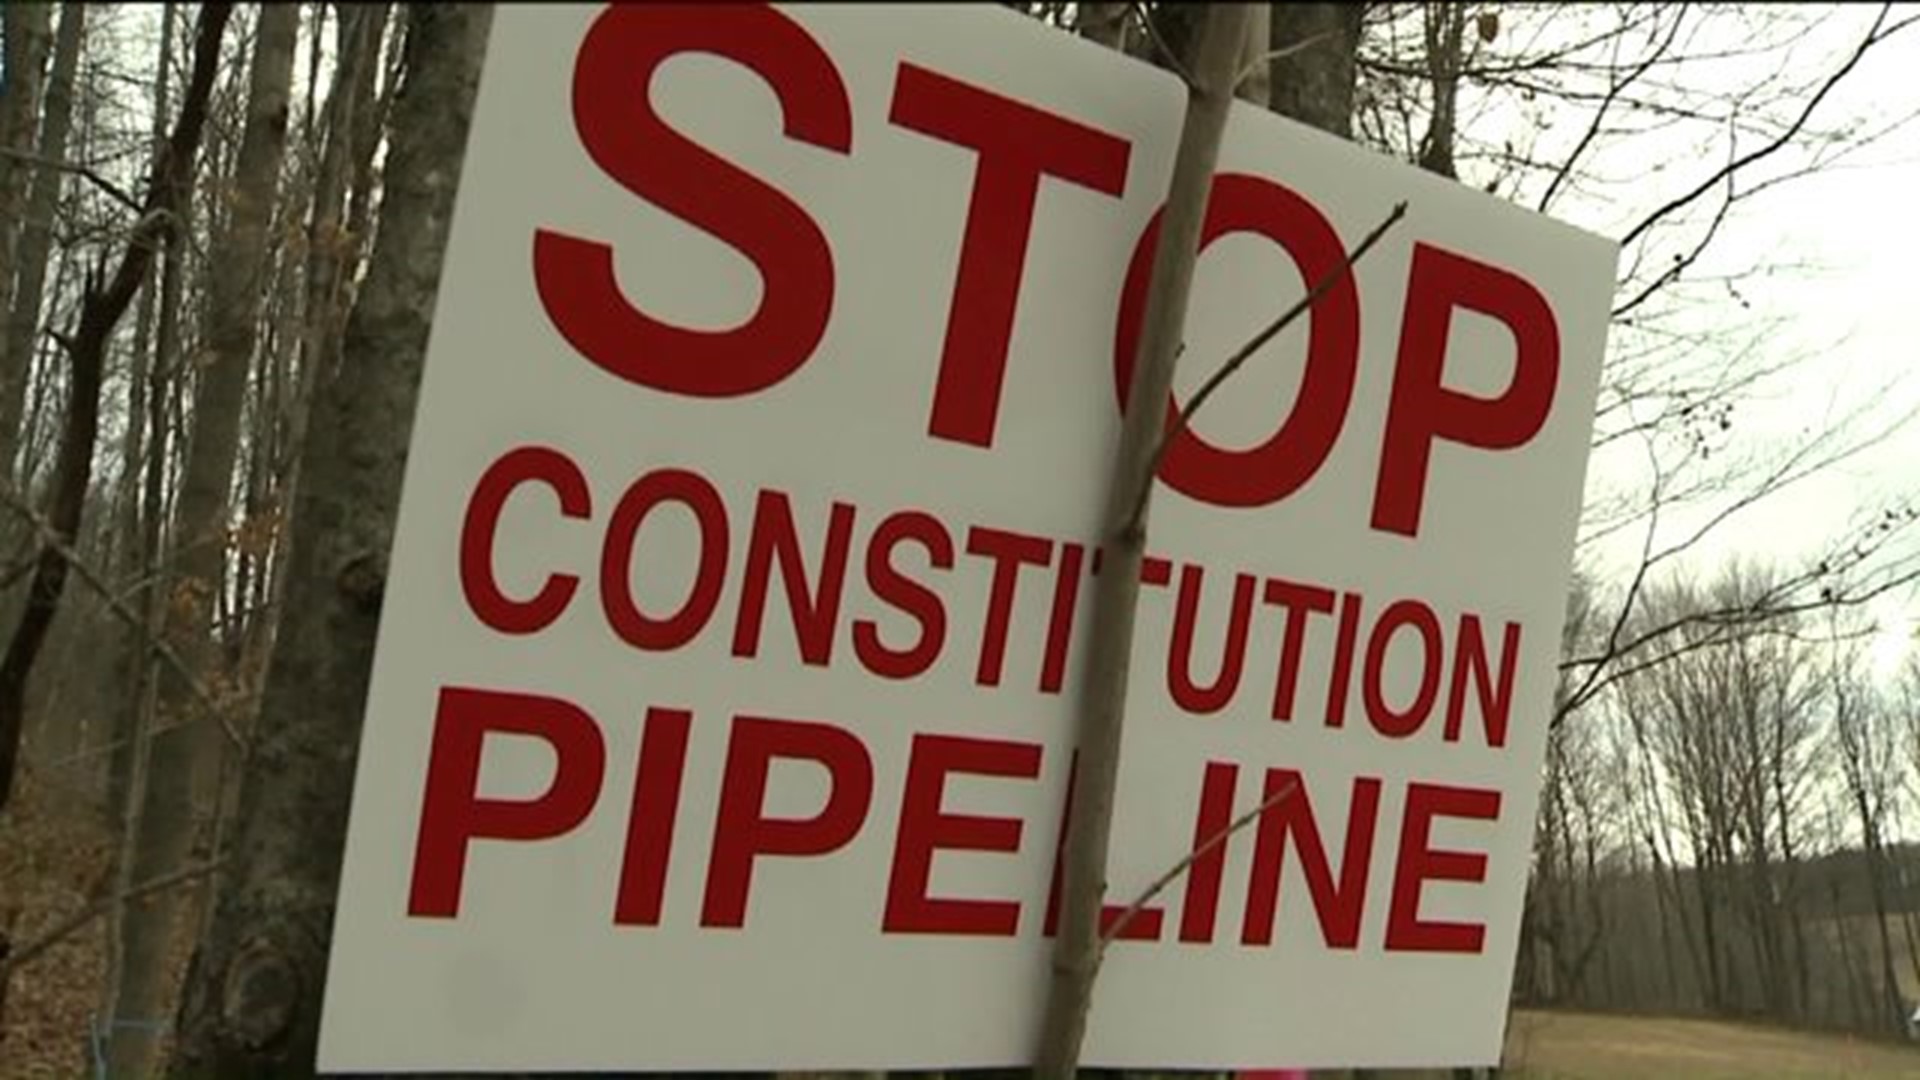 Trees on Chopping Block for Natural Gas Pipeline